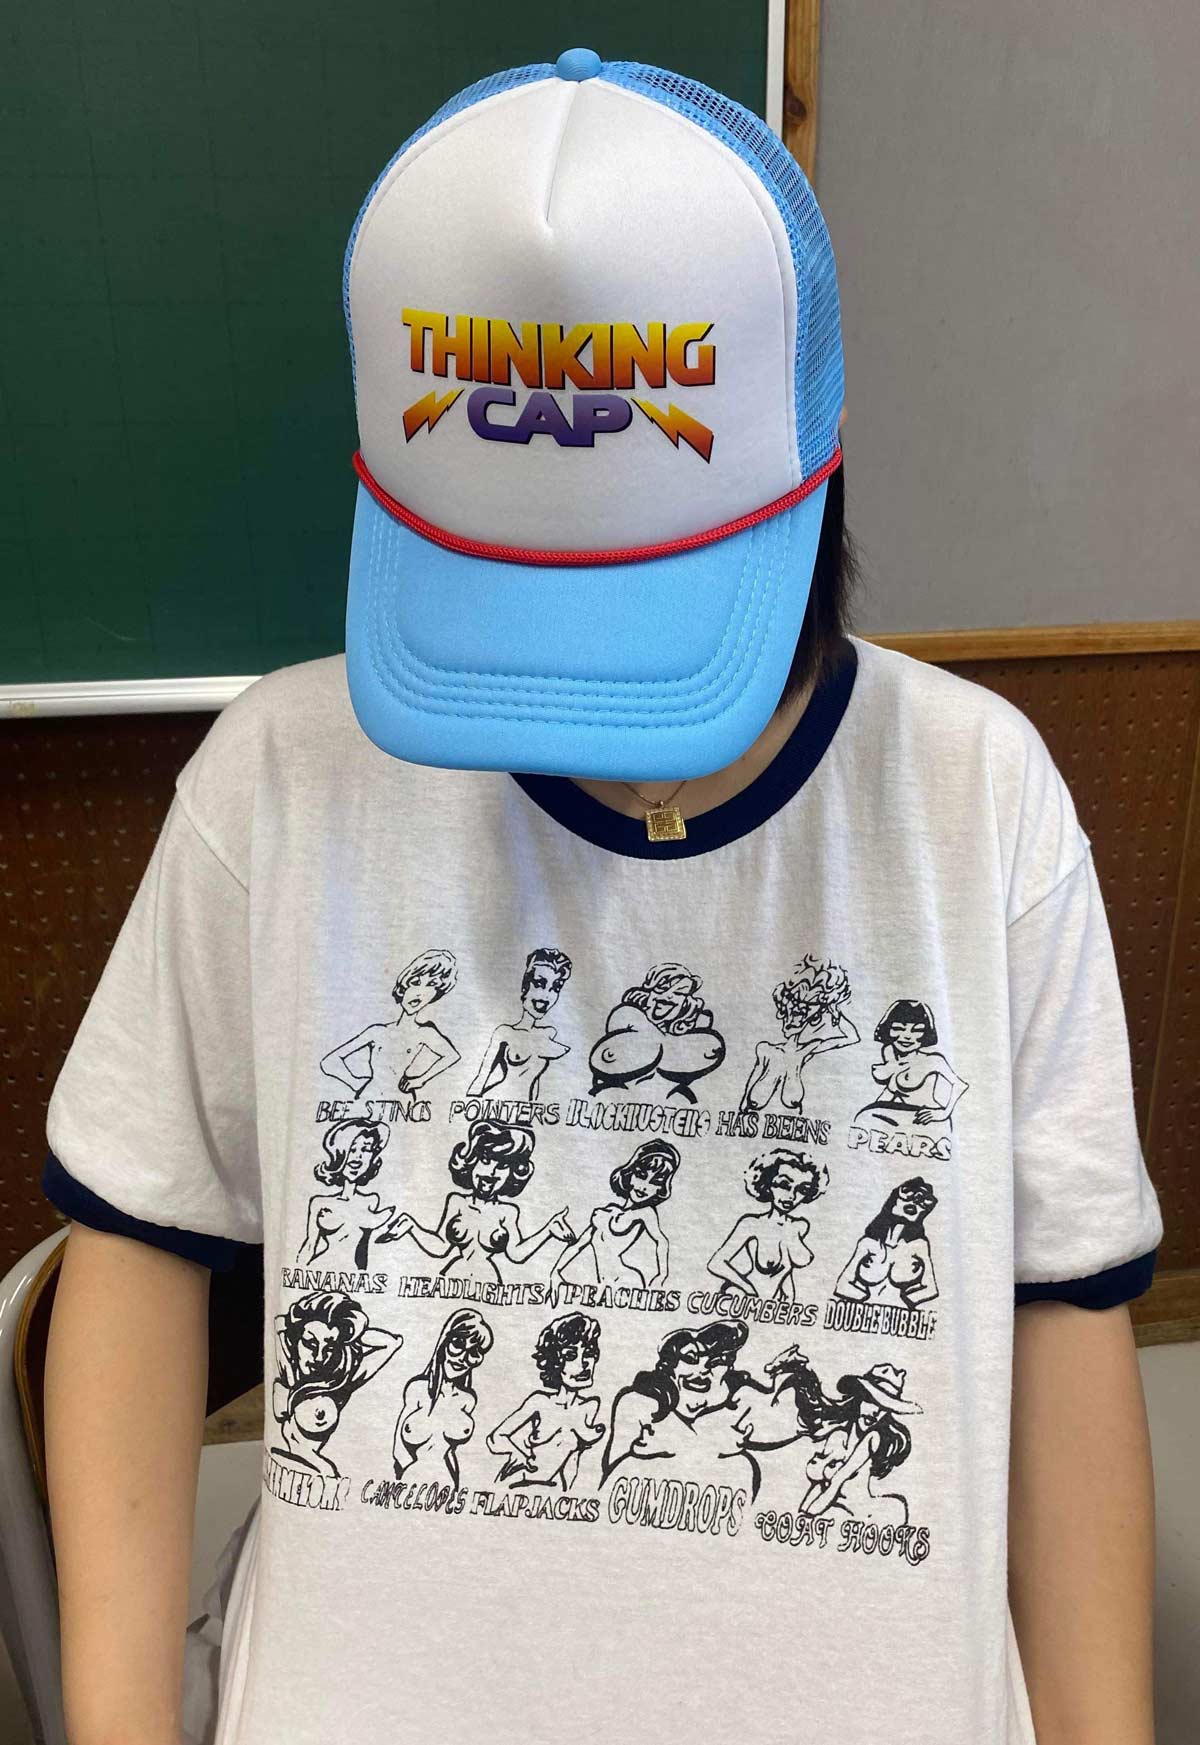 Boob Type shirt worn by one of my students at a Japanese university